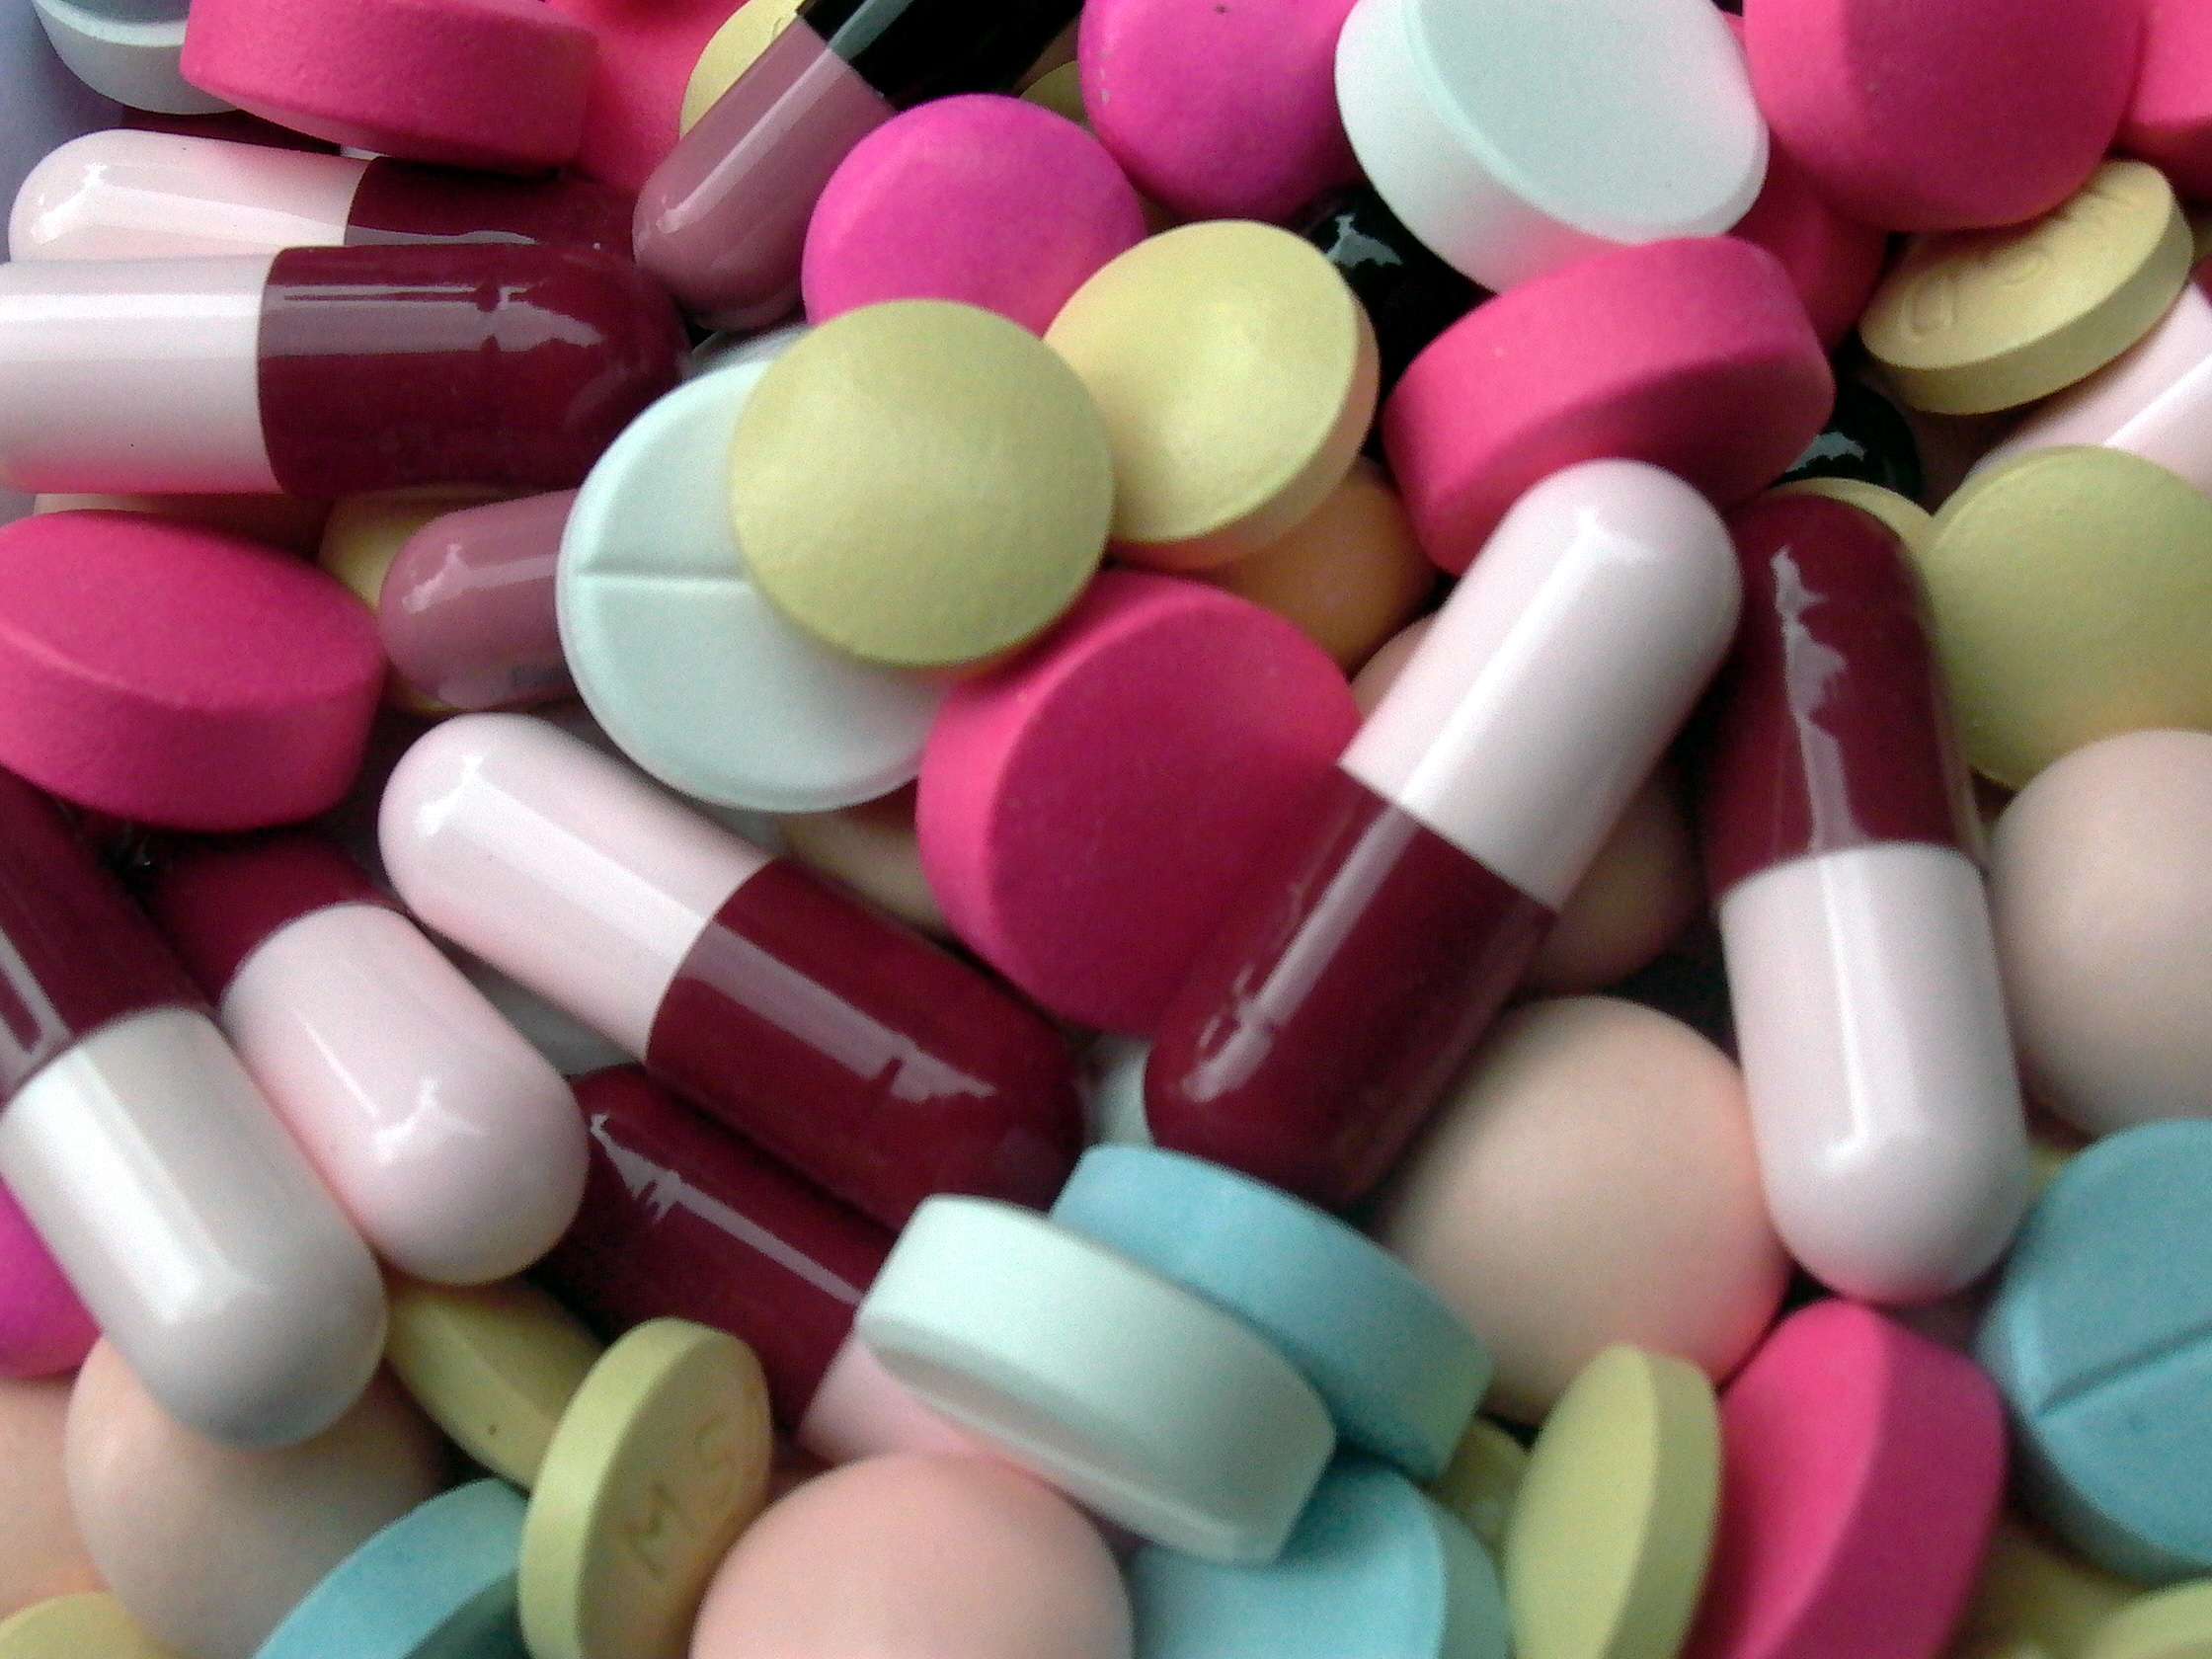 Antibiotics May Be Bad For Your Health